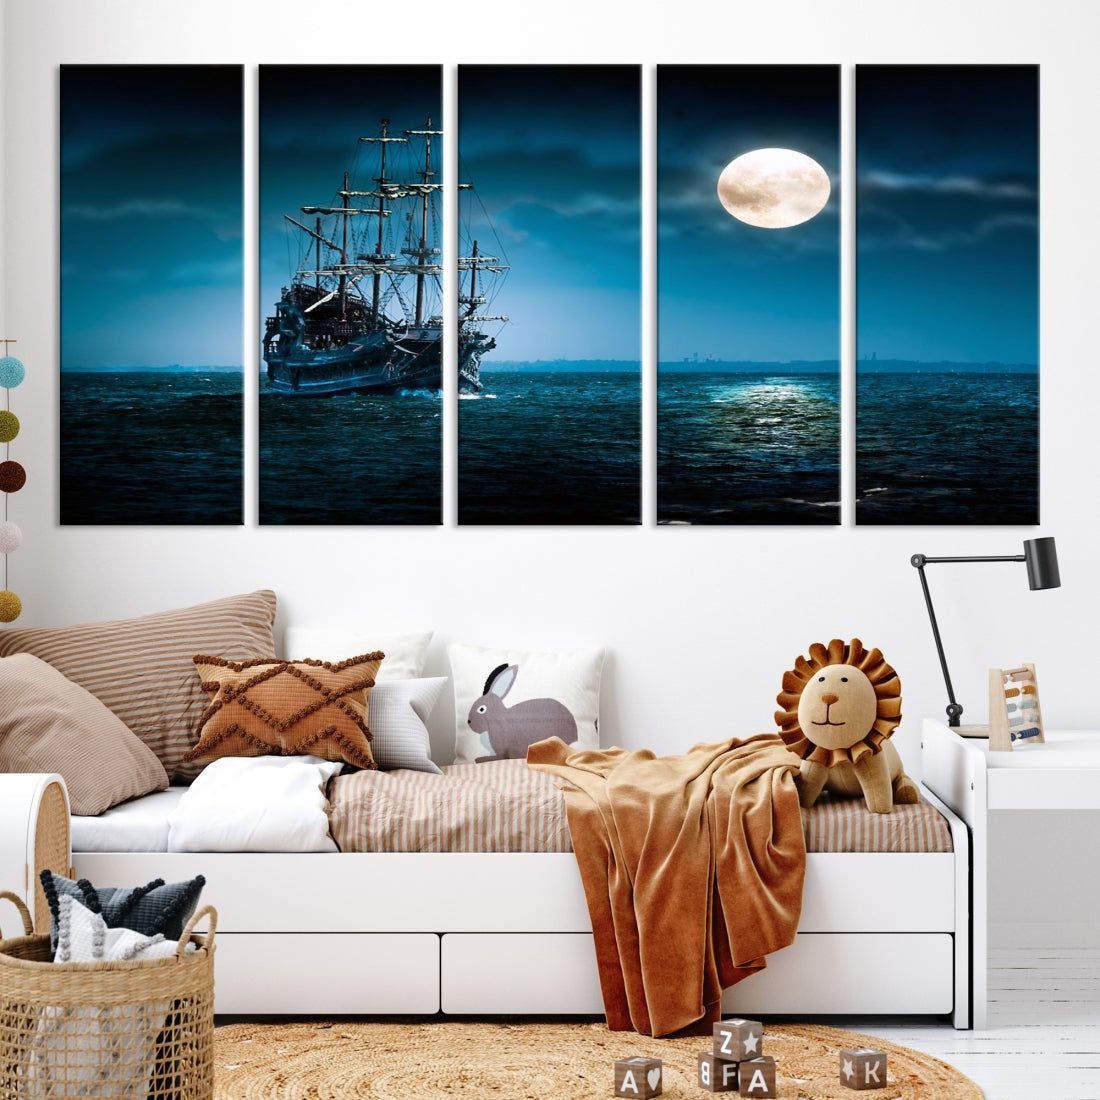 Moon and Ship in Ocean at Night Large Wall Art Canvas Print